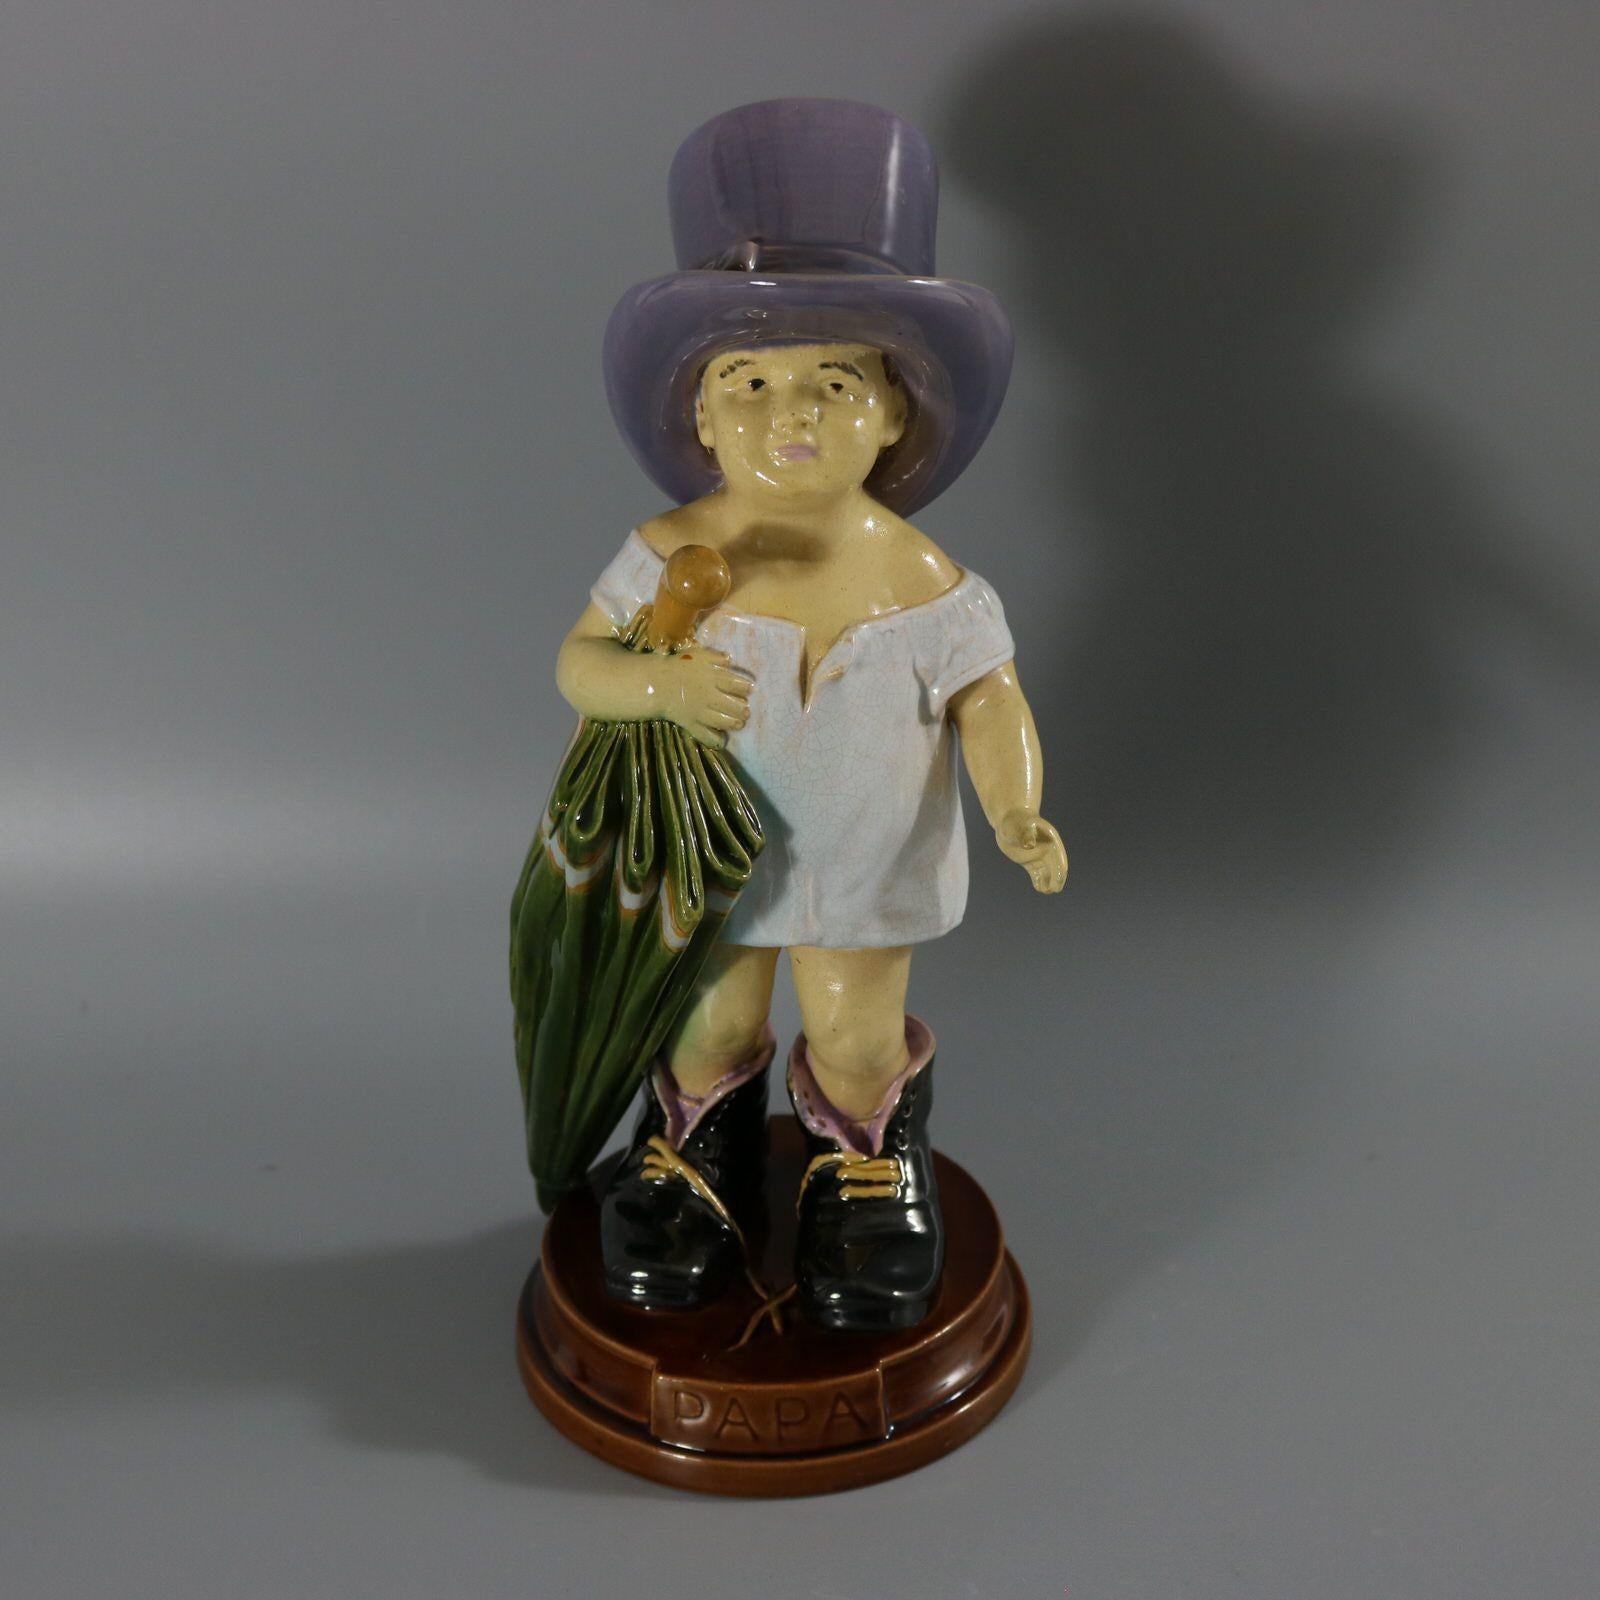 Brownfield Majolica figure which features a young child wearing a grown ups hat and shoes, carrying an umbrella. Title, 'PAPA' molded into the base - French and Spanish for Dad. No doubt the child is wearing Dad's shoes and hat and carrying his